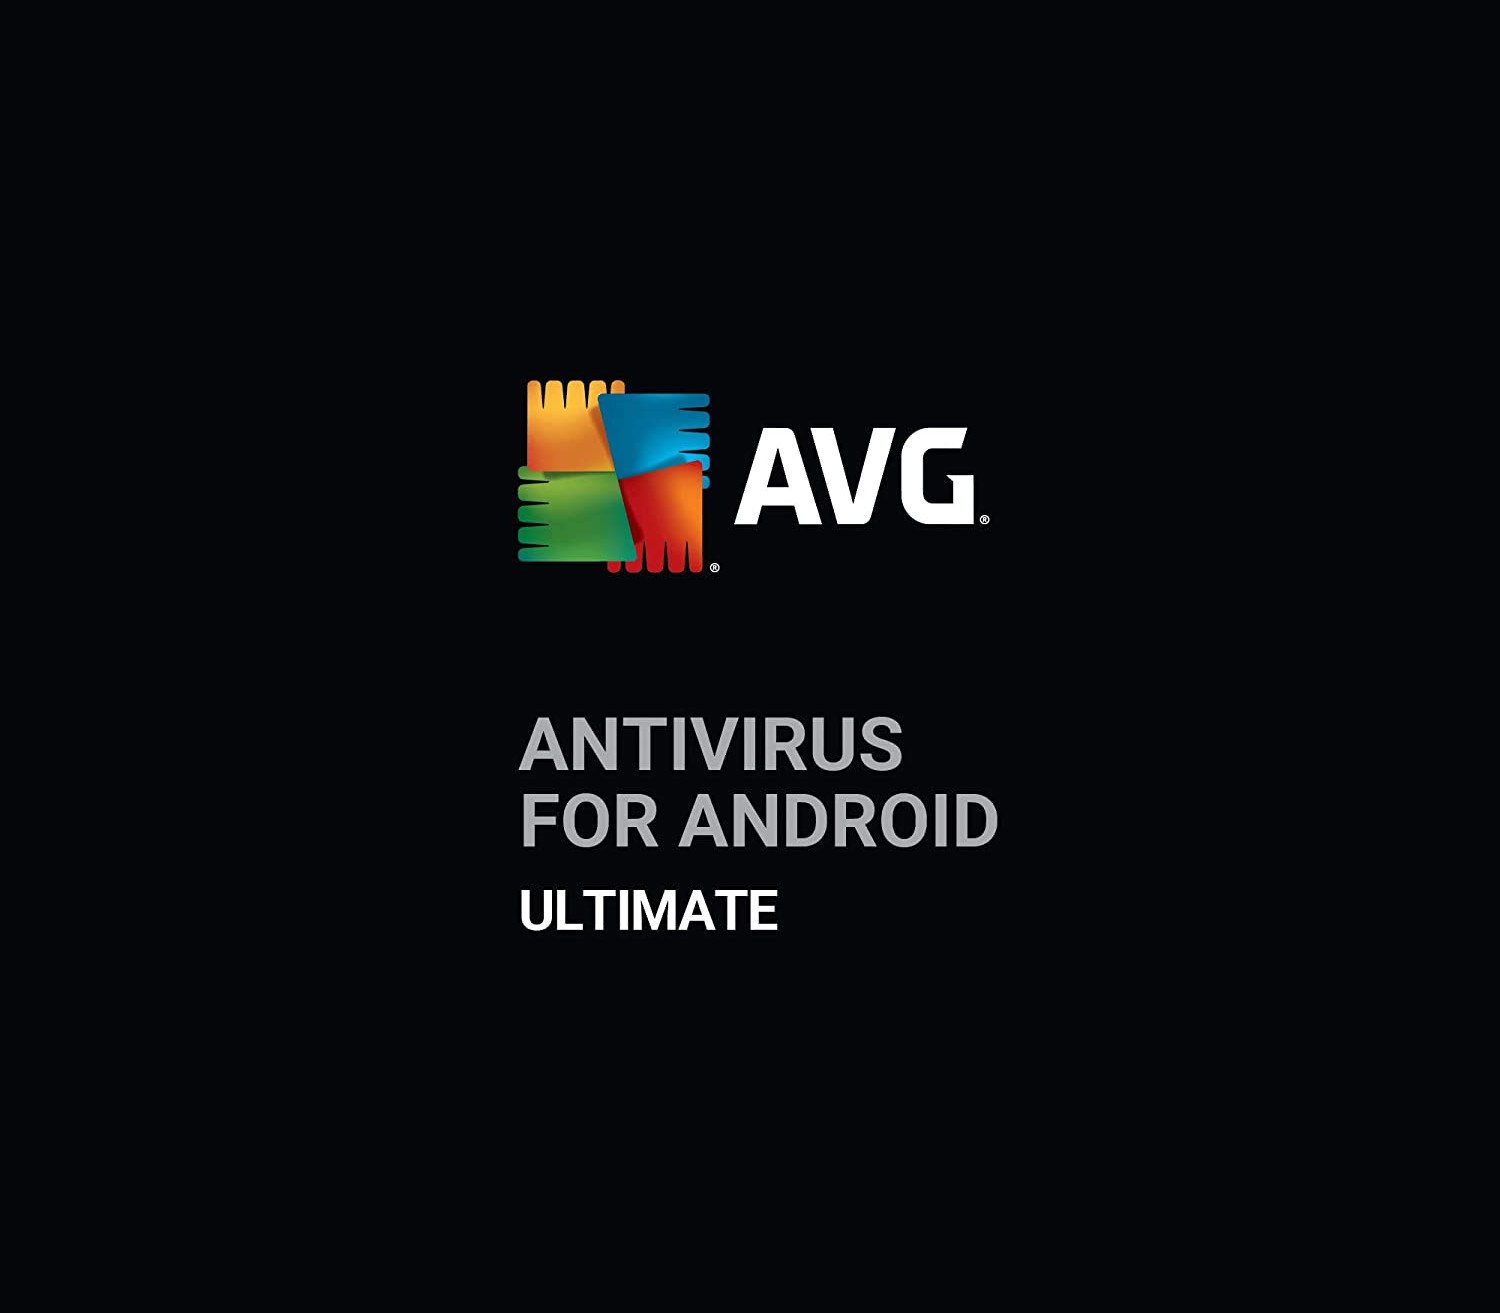 AVG Antivirus for Android - Ultimate Key (1 Year / 1 Device), $6.84